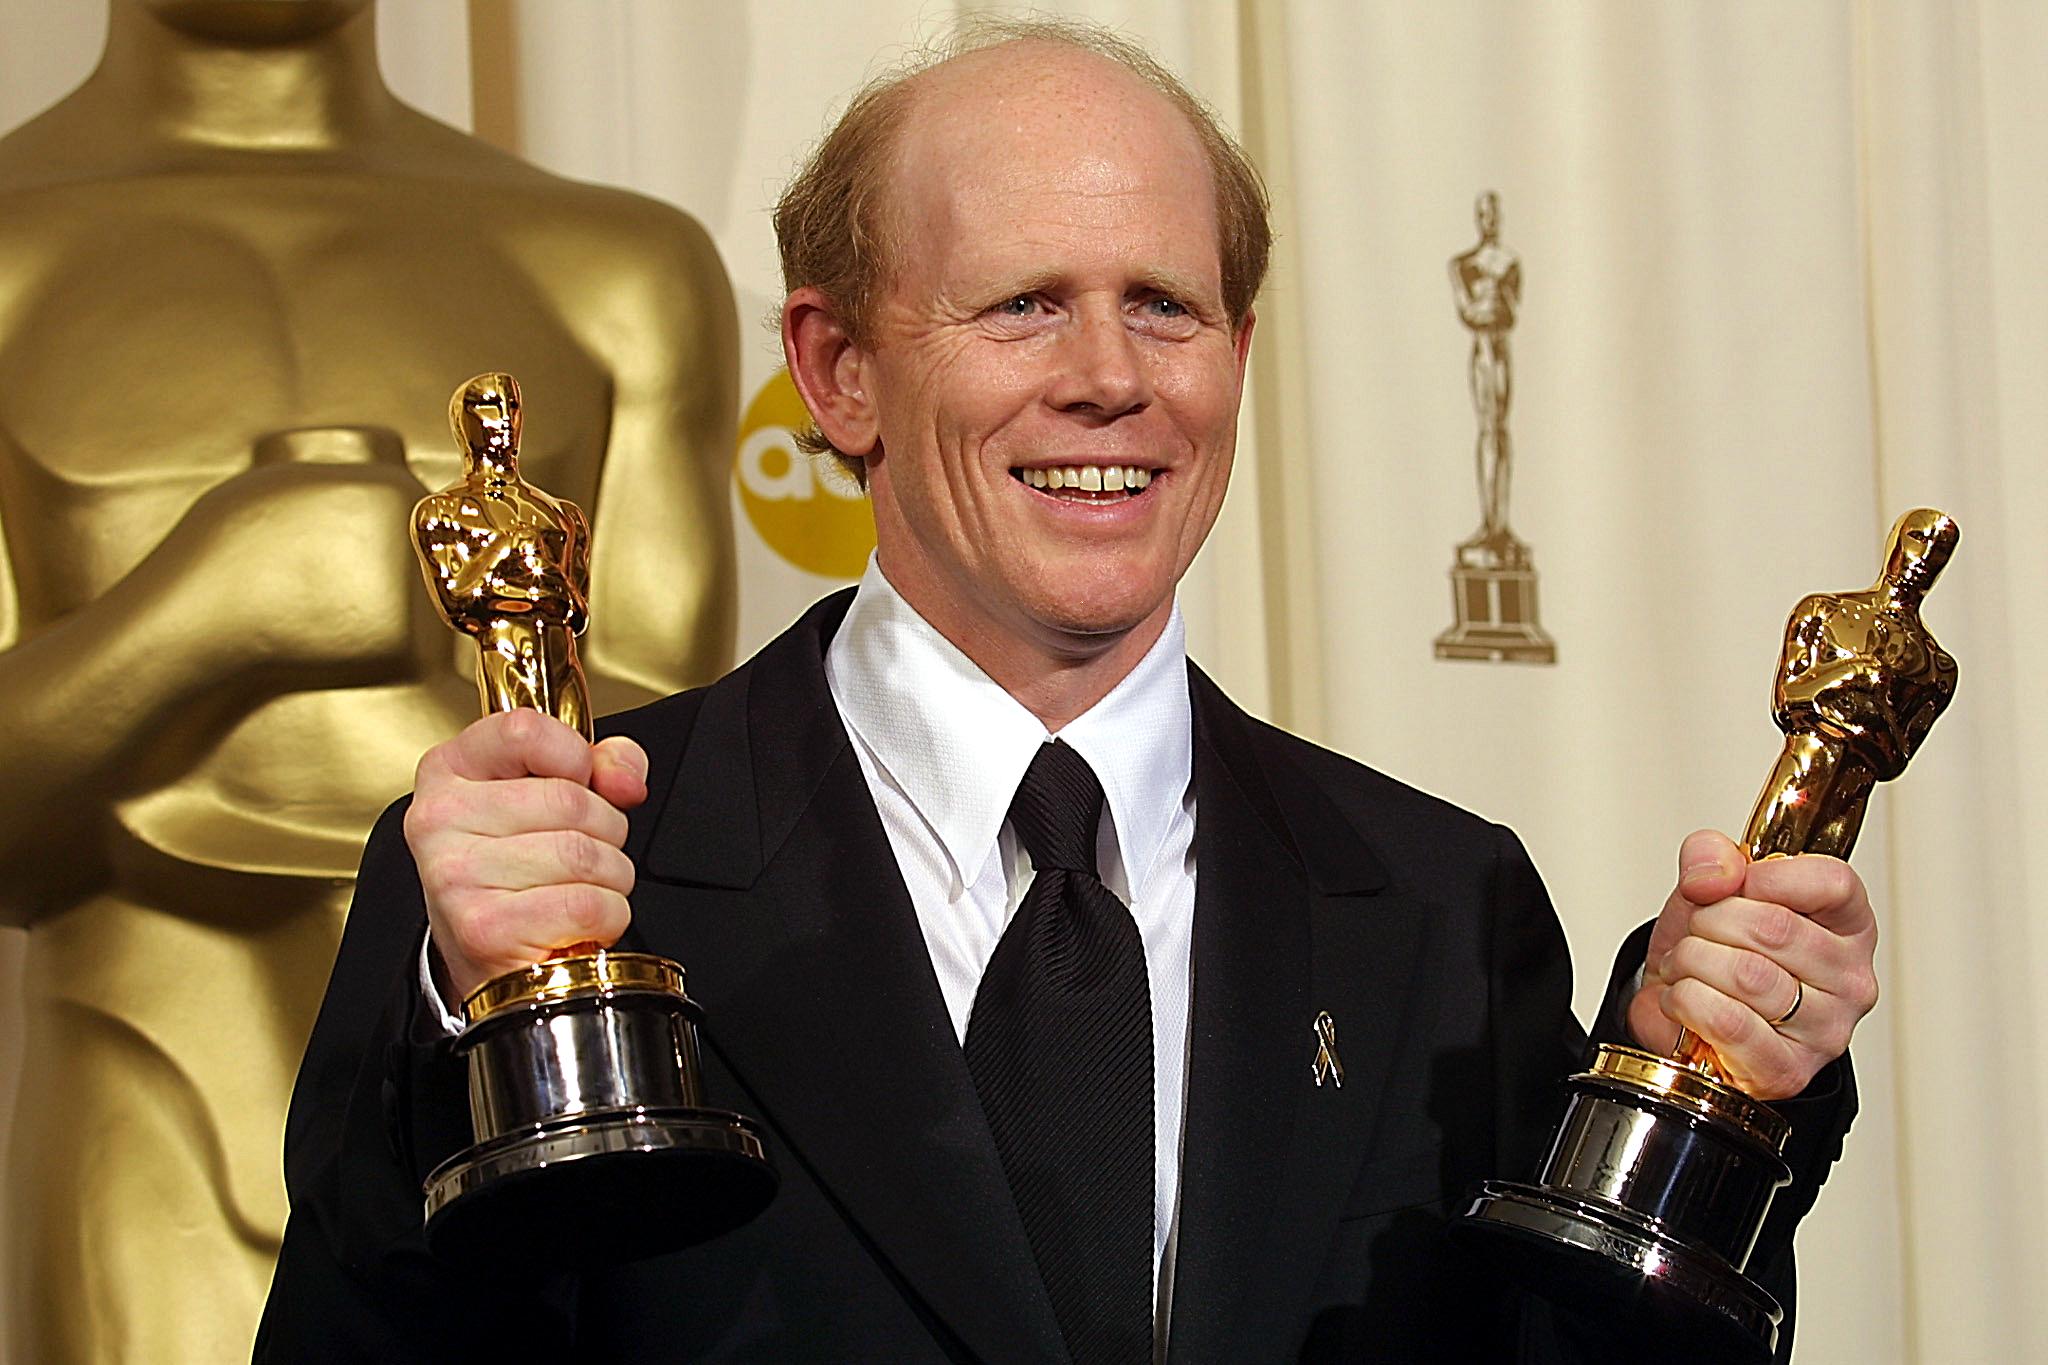 Ron Howard holds his Oscars and poses